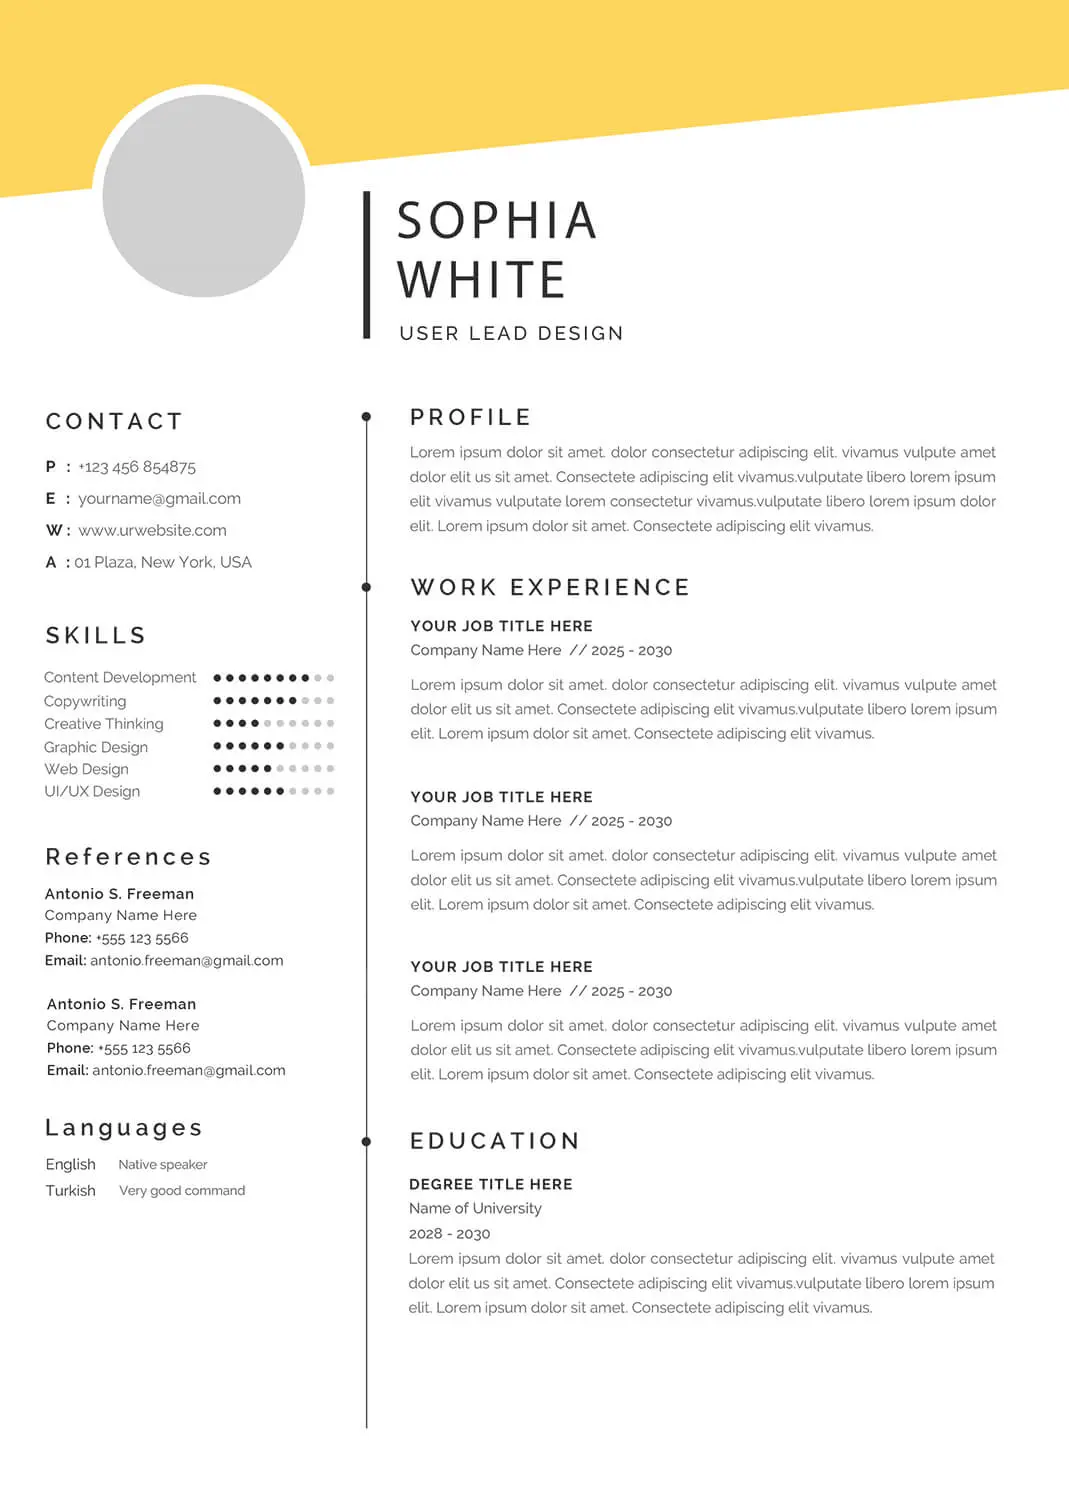 Youth Services Specialist Resume Templates